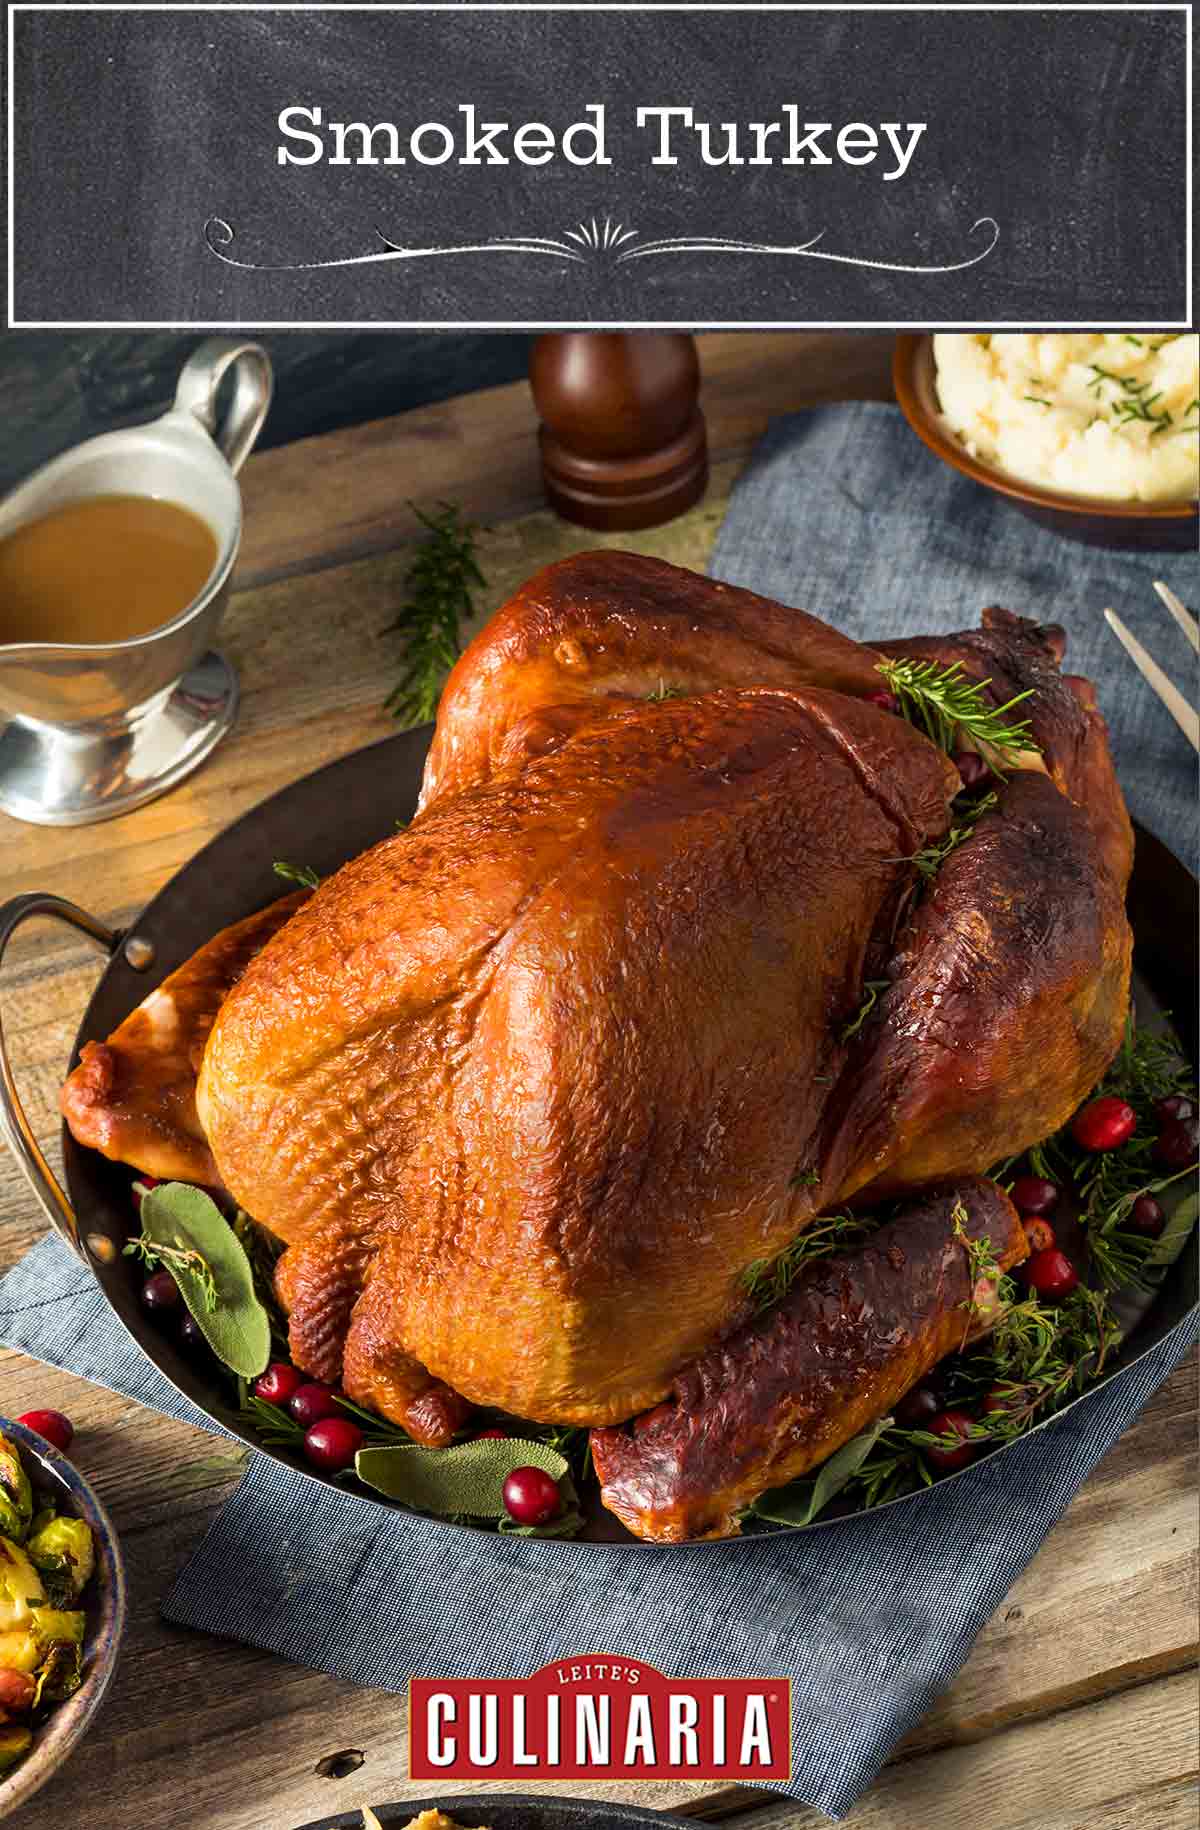 A whole smoked turkey in a metal serving dish on a bed of fresh herbs and cranberries.